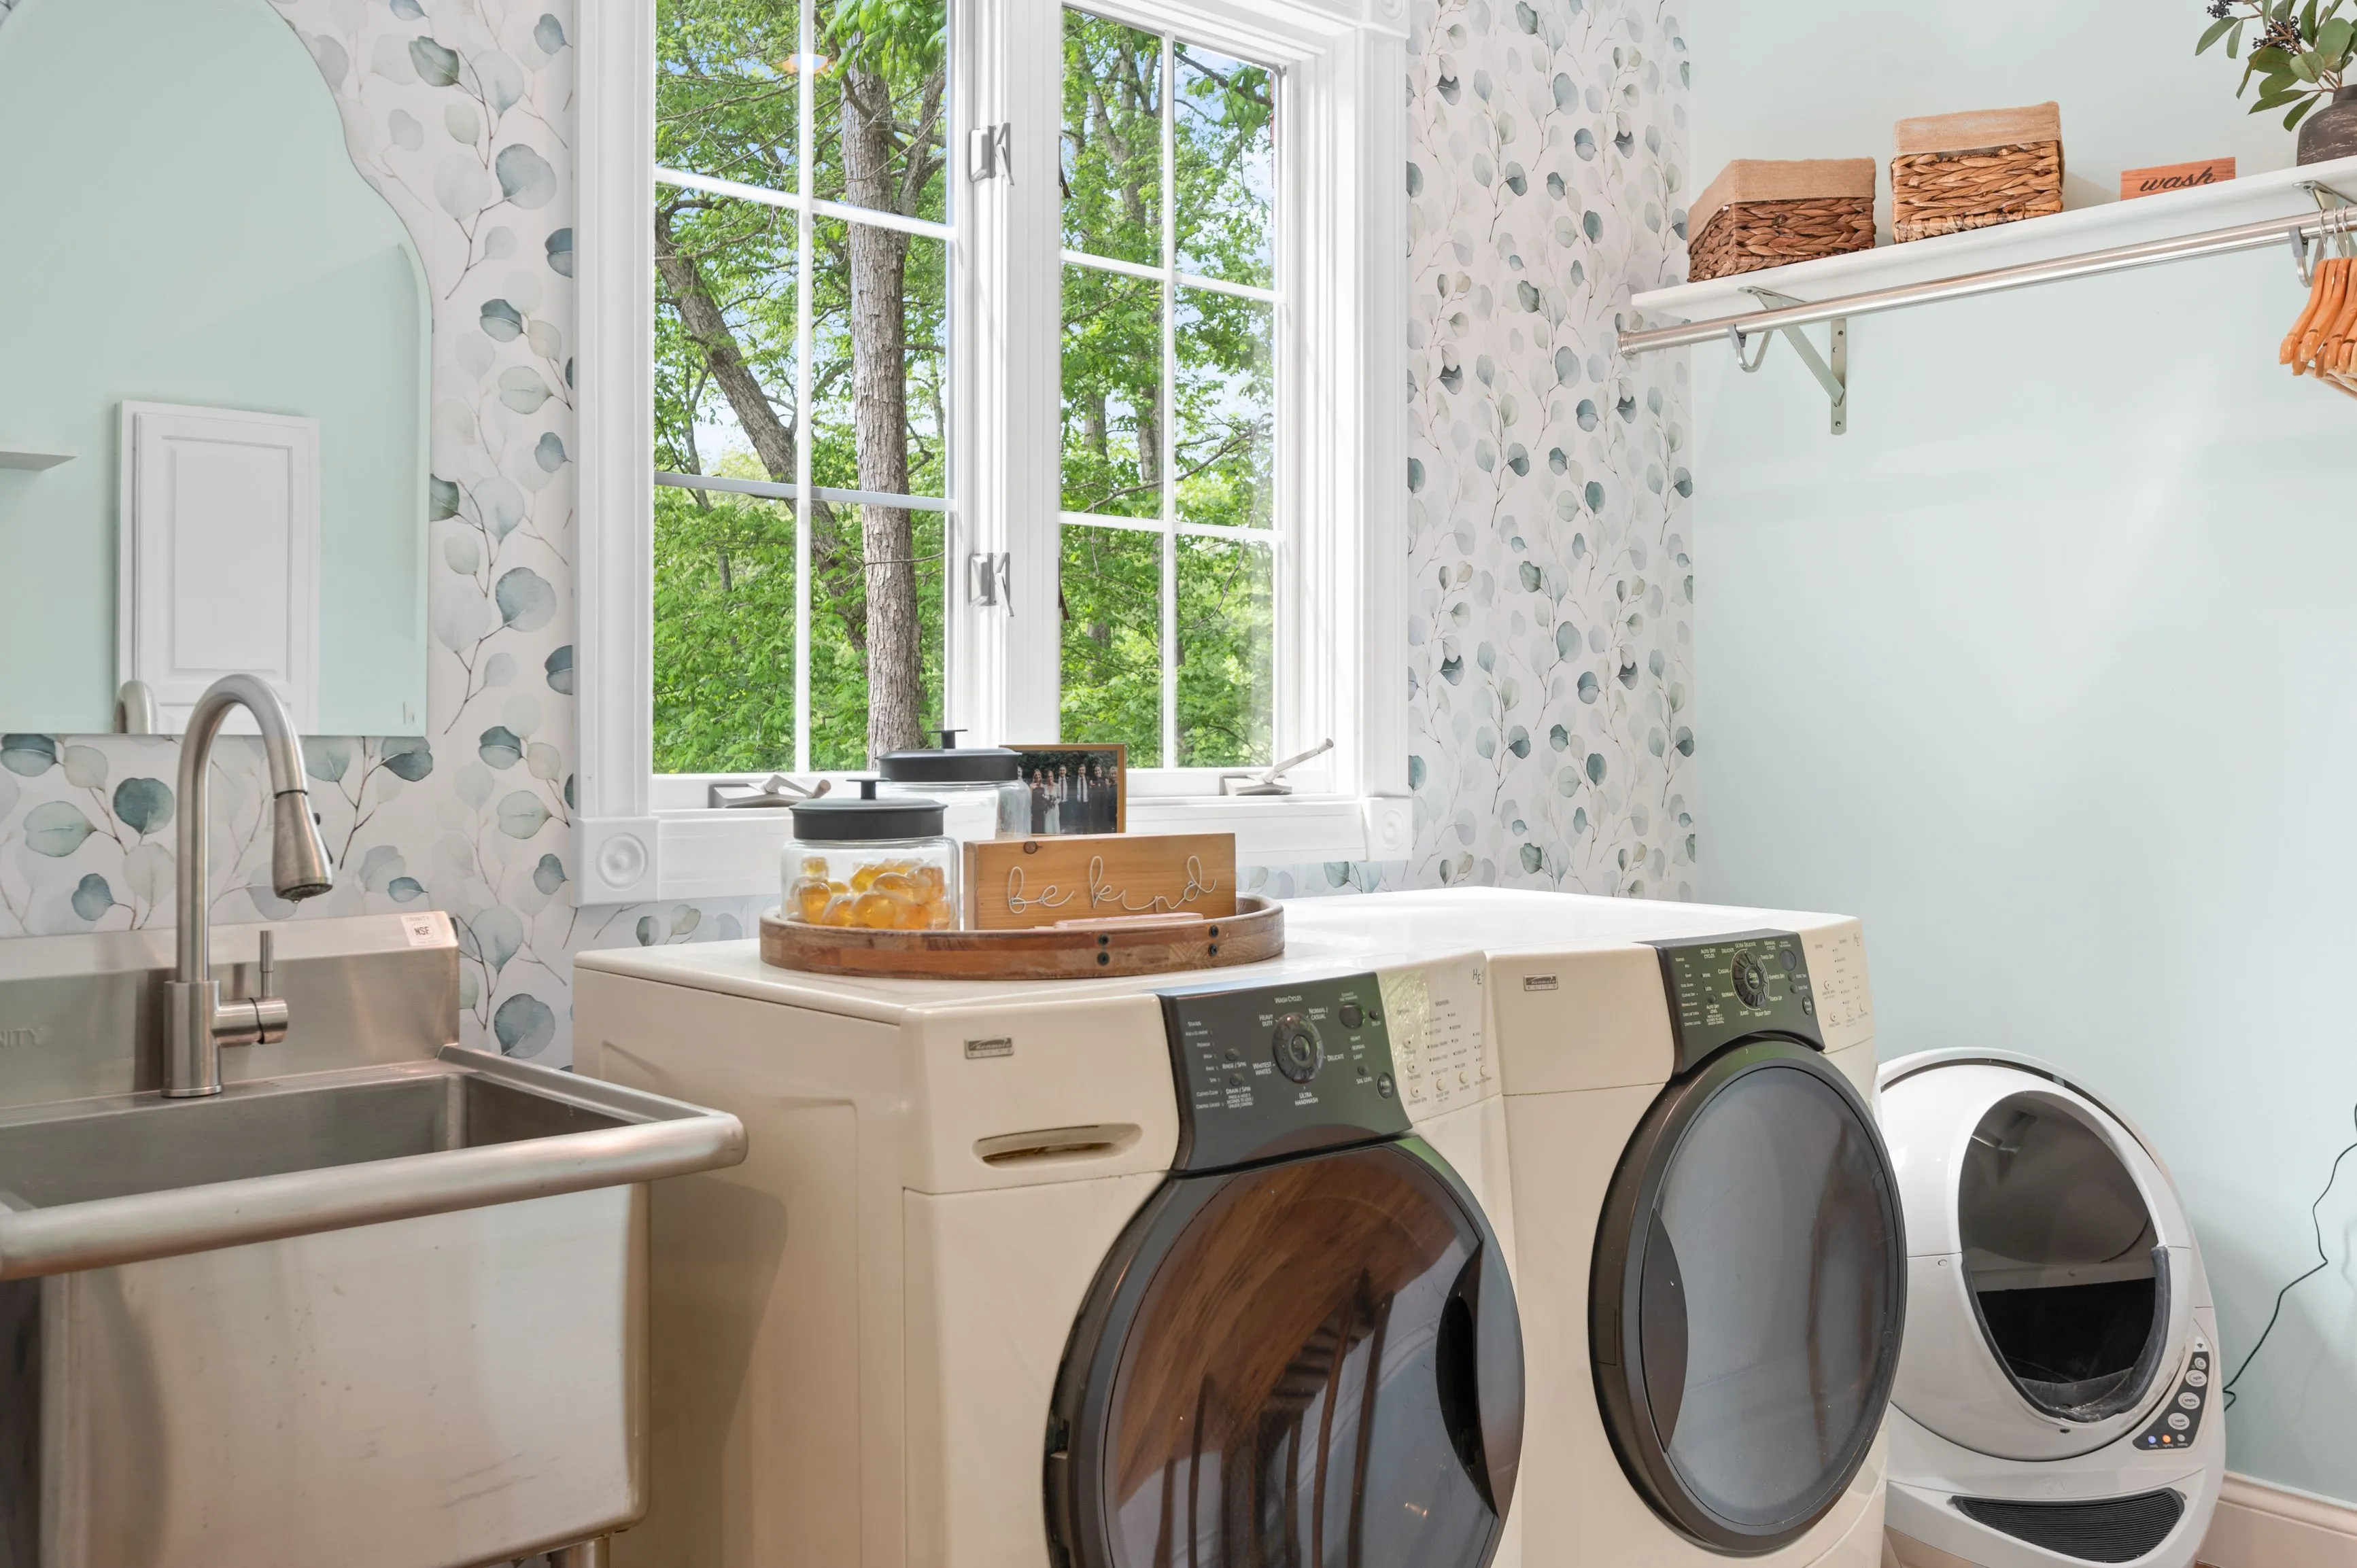 A bright laundry room with a front-loading washer and dryer, utility sink, and leaf-patterned wallpaper with a view of trees outside a window.